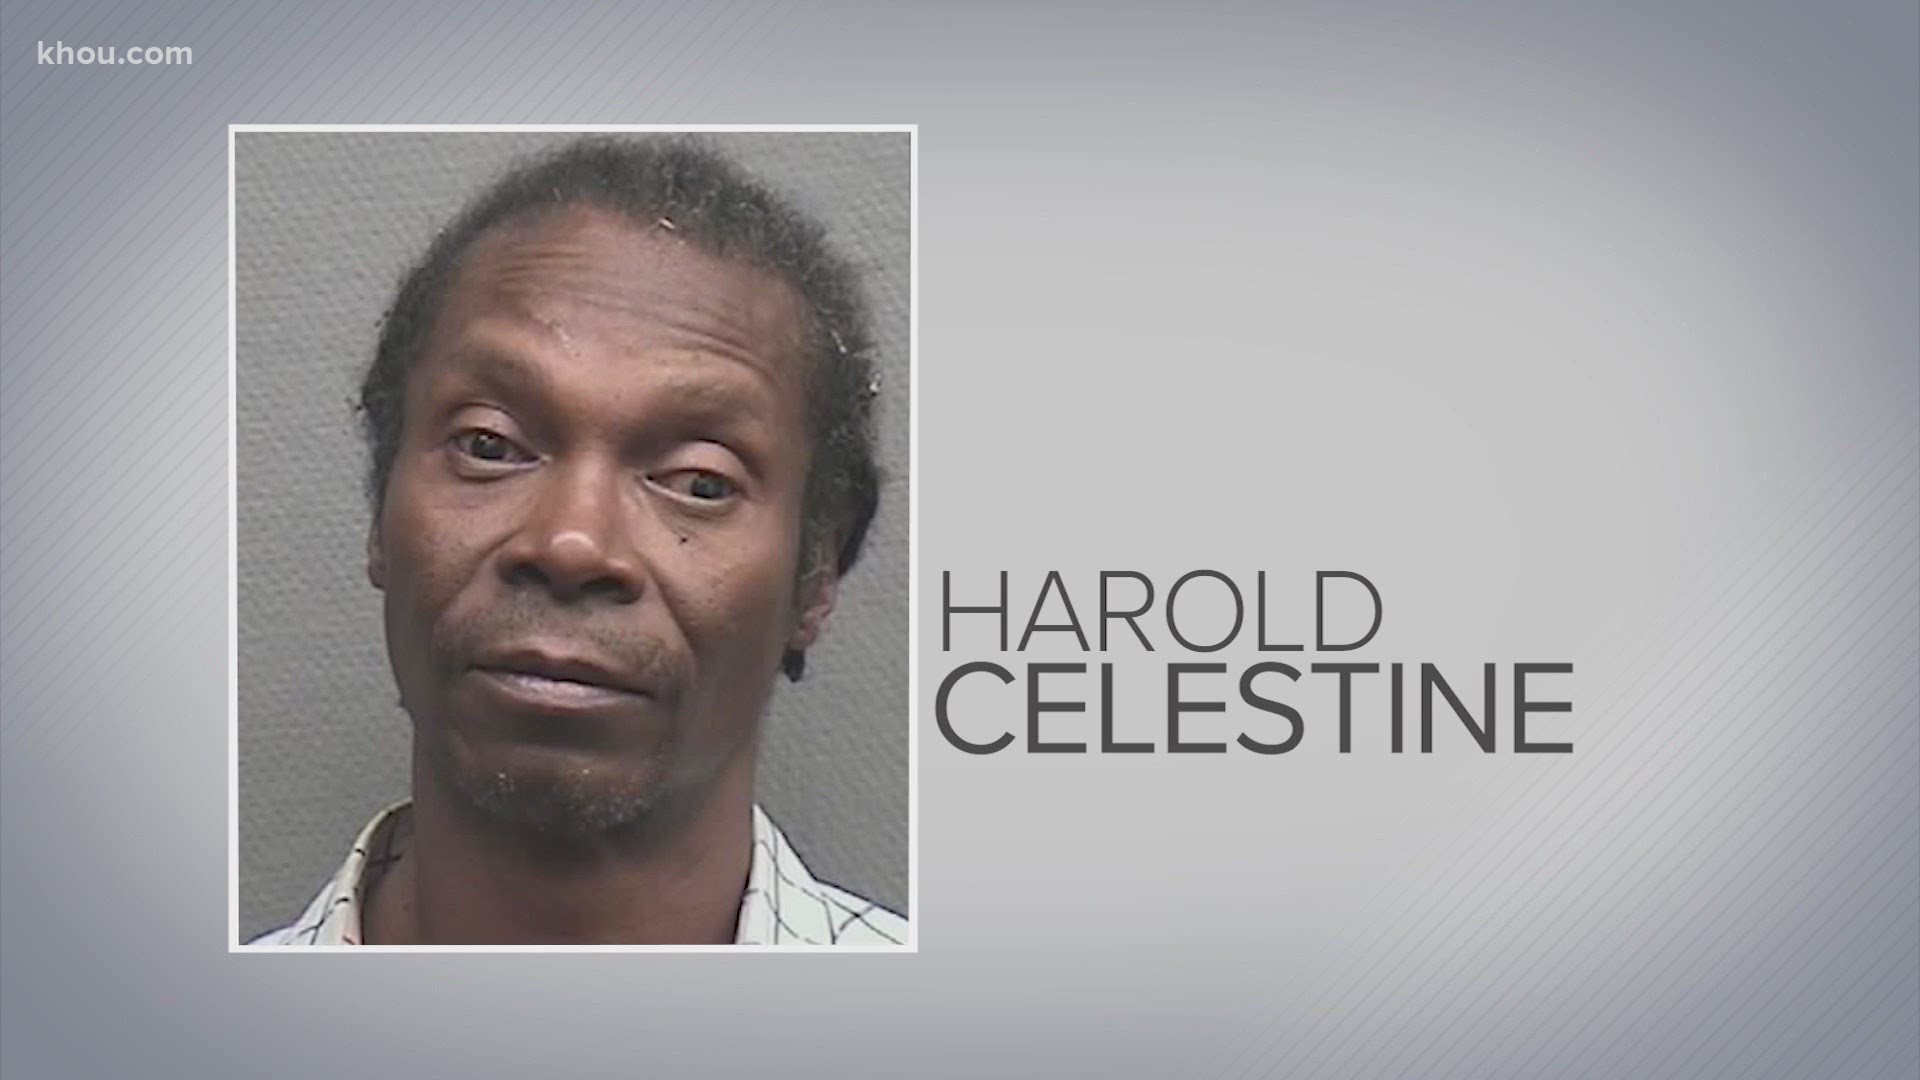 The suspect, 60-year-old Harold Lynn Celestine, is charged with aggravated assault of a family member. His girlfriend is in critical condition with bad burns.